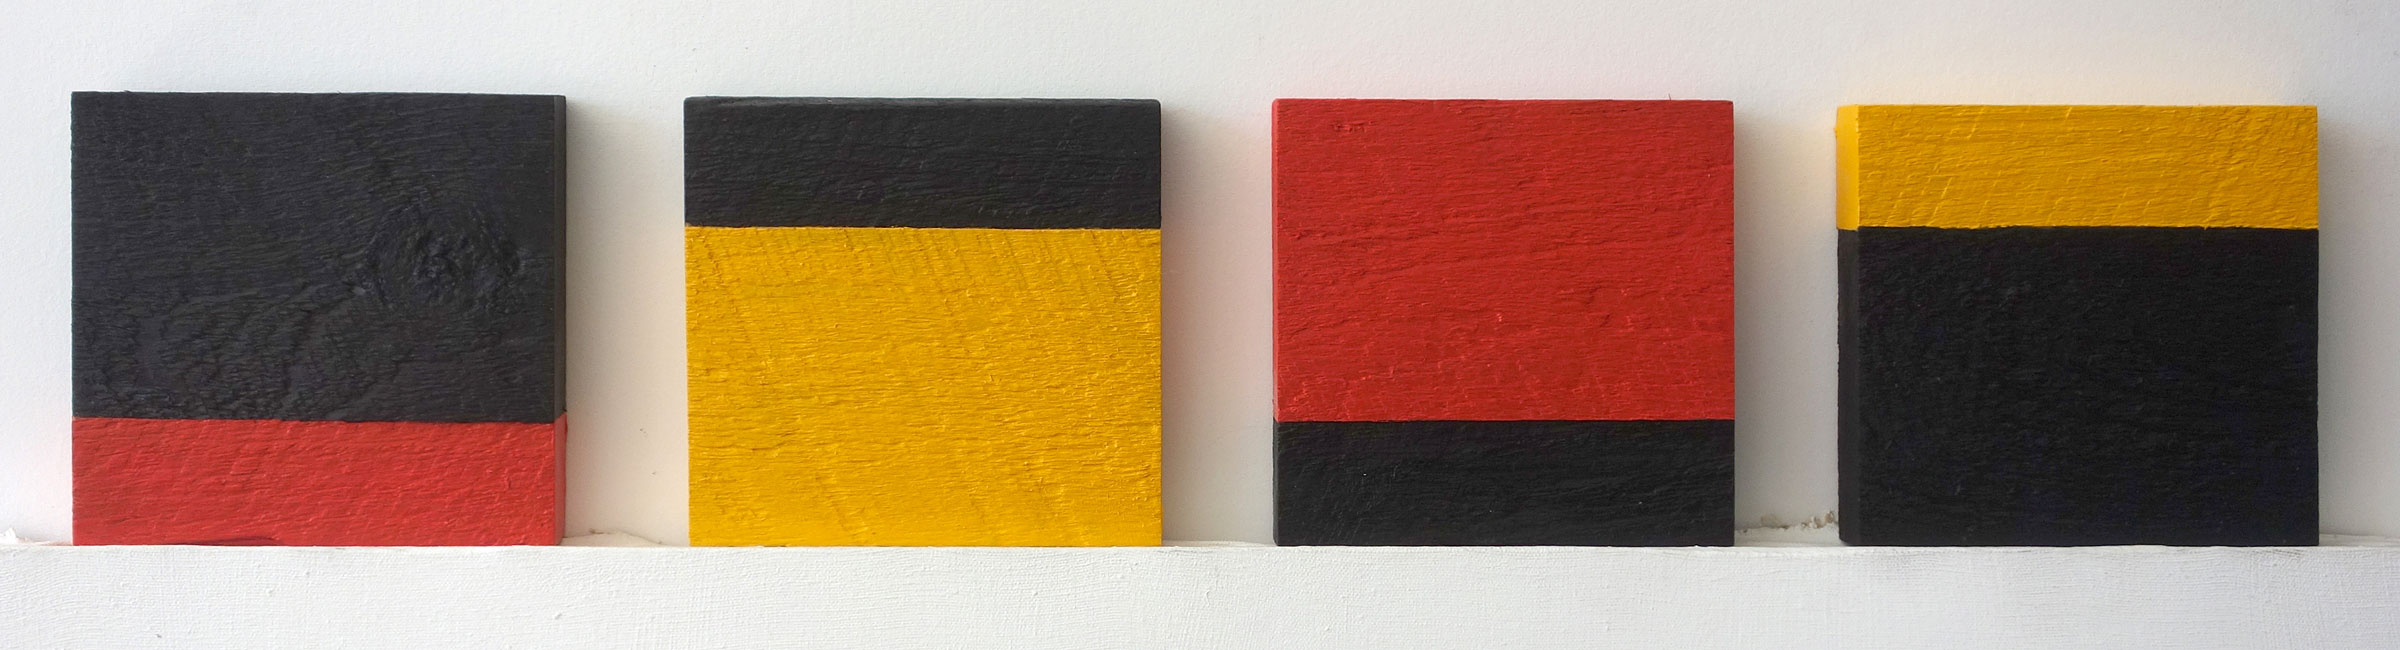 Four "Untitled" entries to Rochester Contemporary 6x6 Show, oil on wood, Paul Dodd 2015